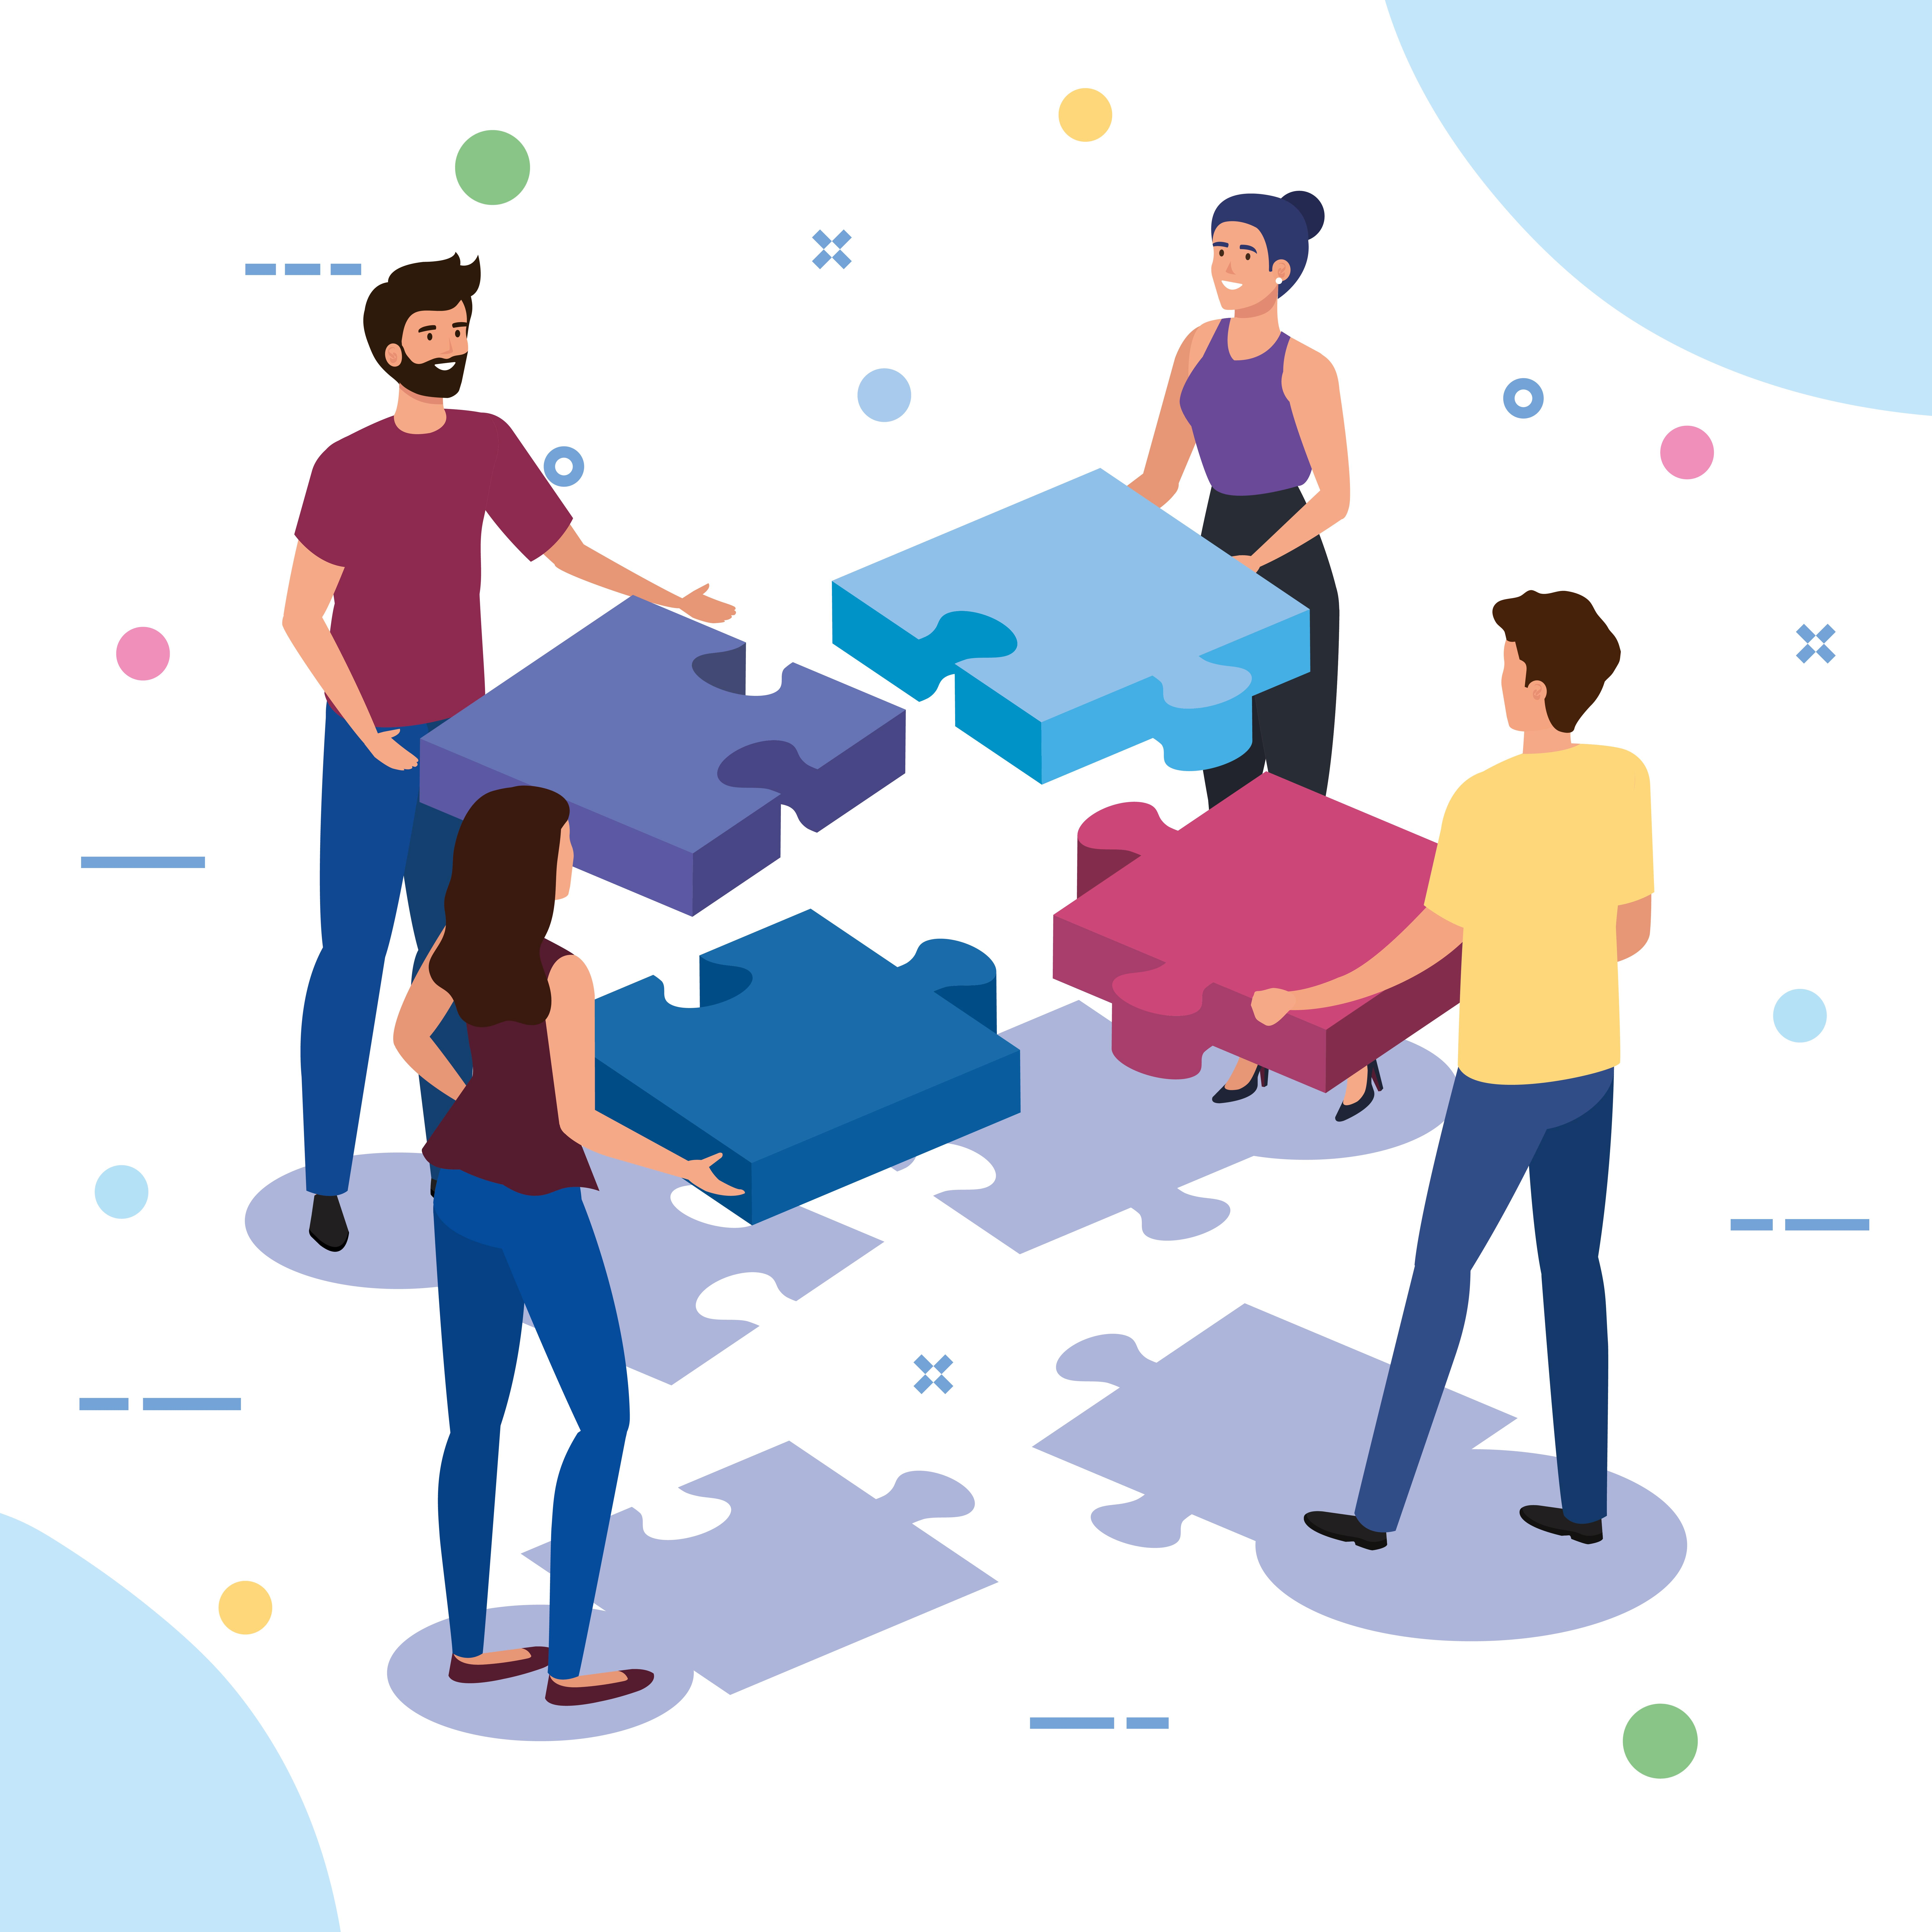 Animated photo of a group of people putting puzzle pieces together